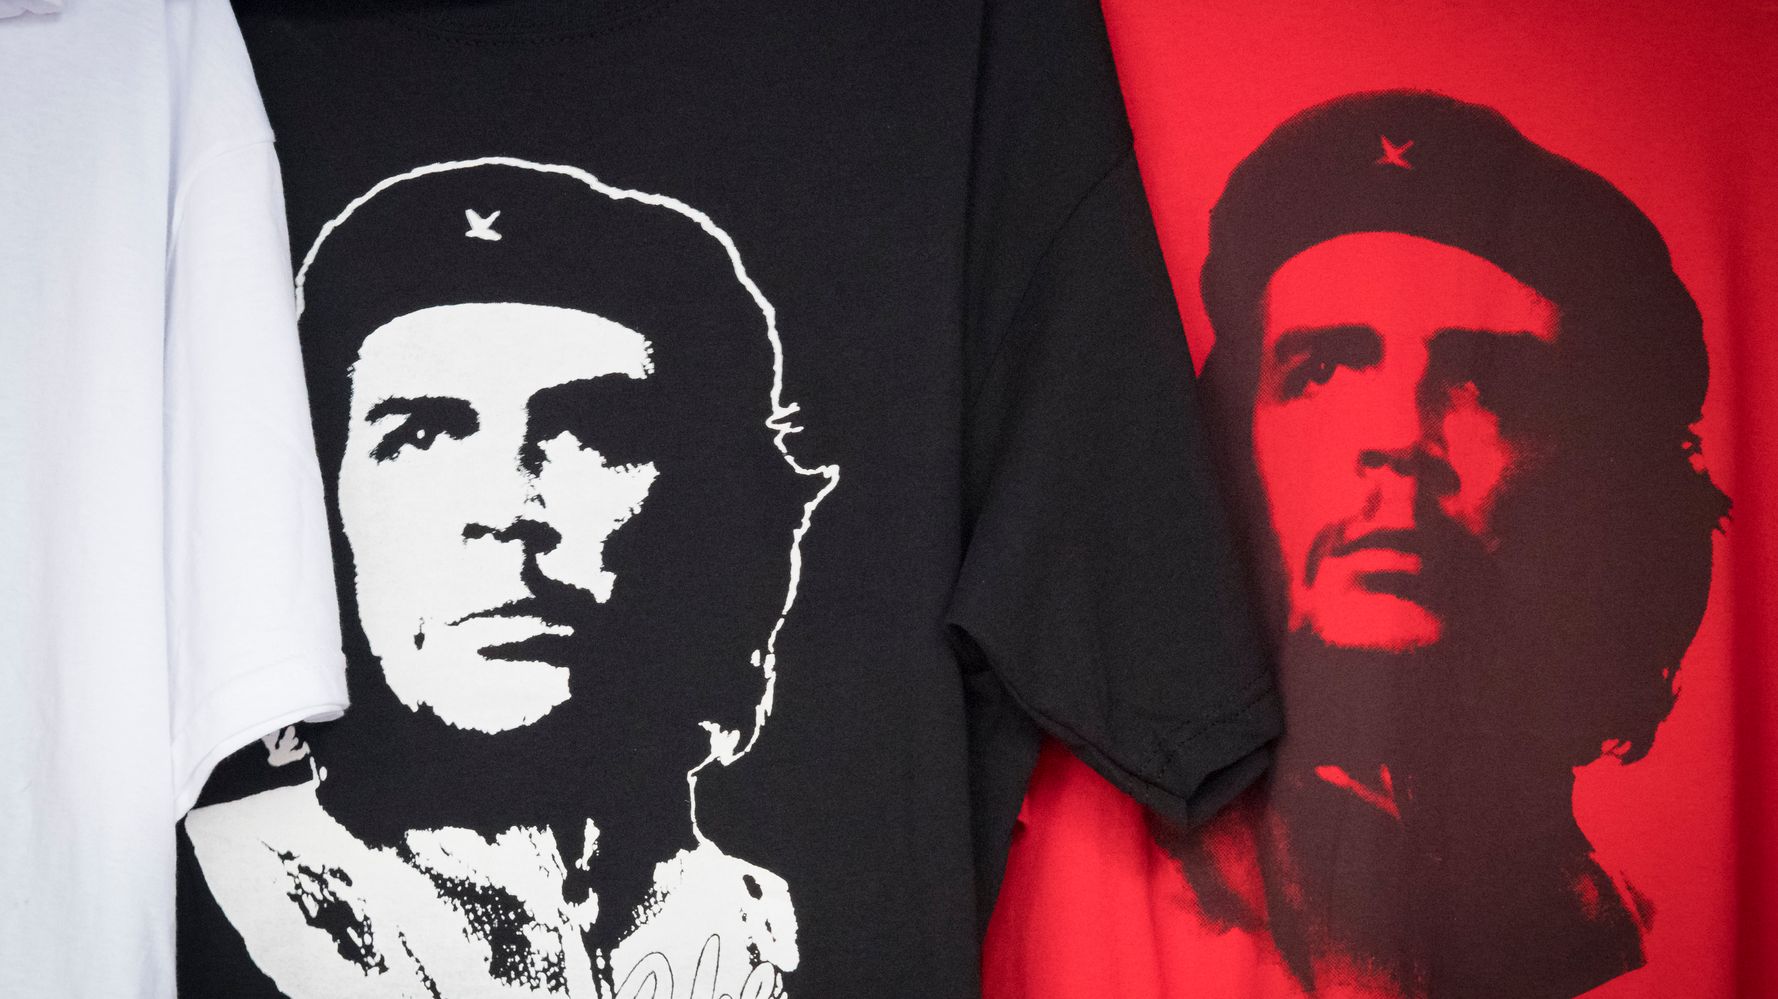 7 Things You Should Know Before Putting On That Che Guevara T-Shirt